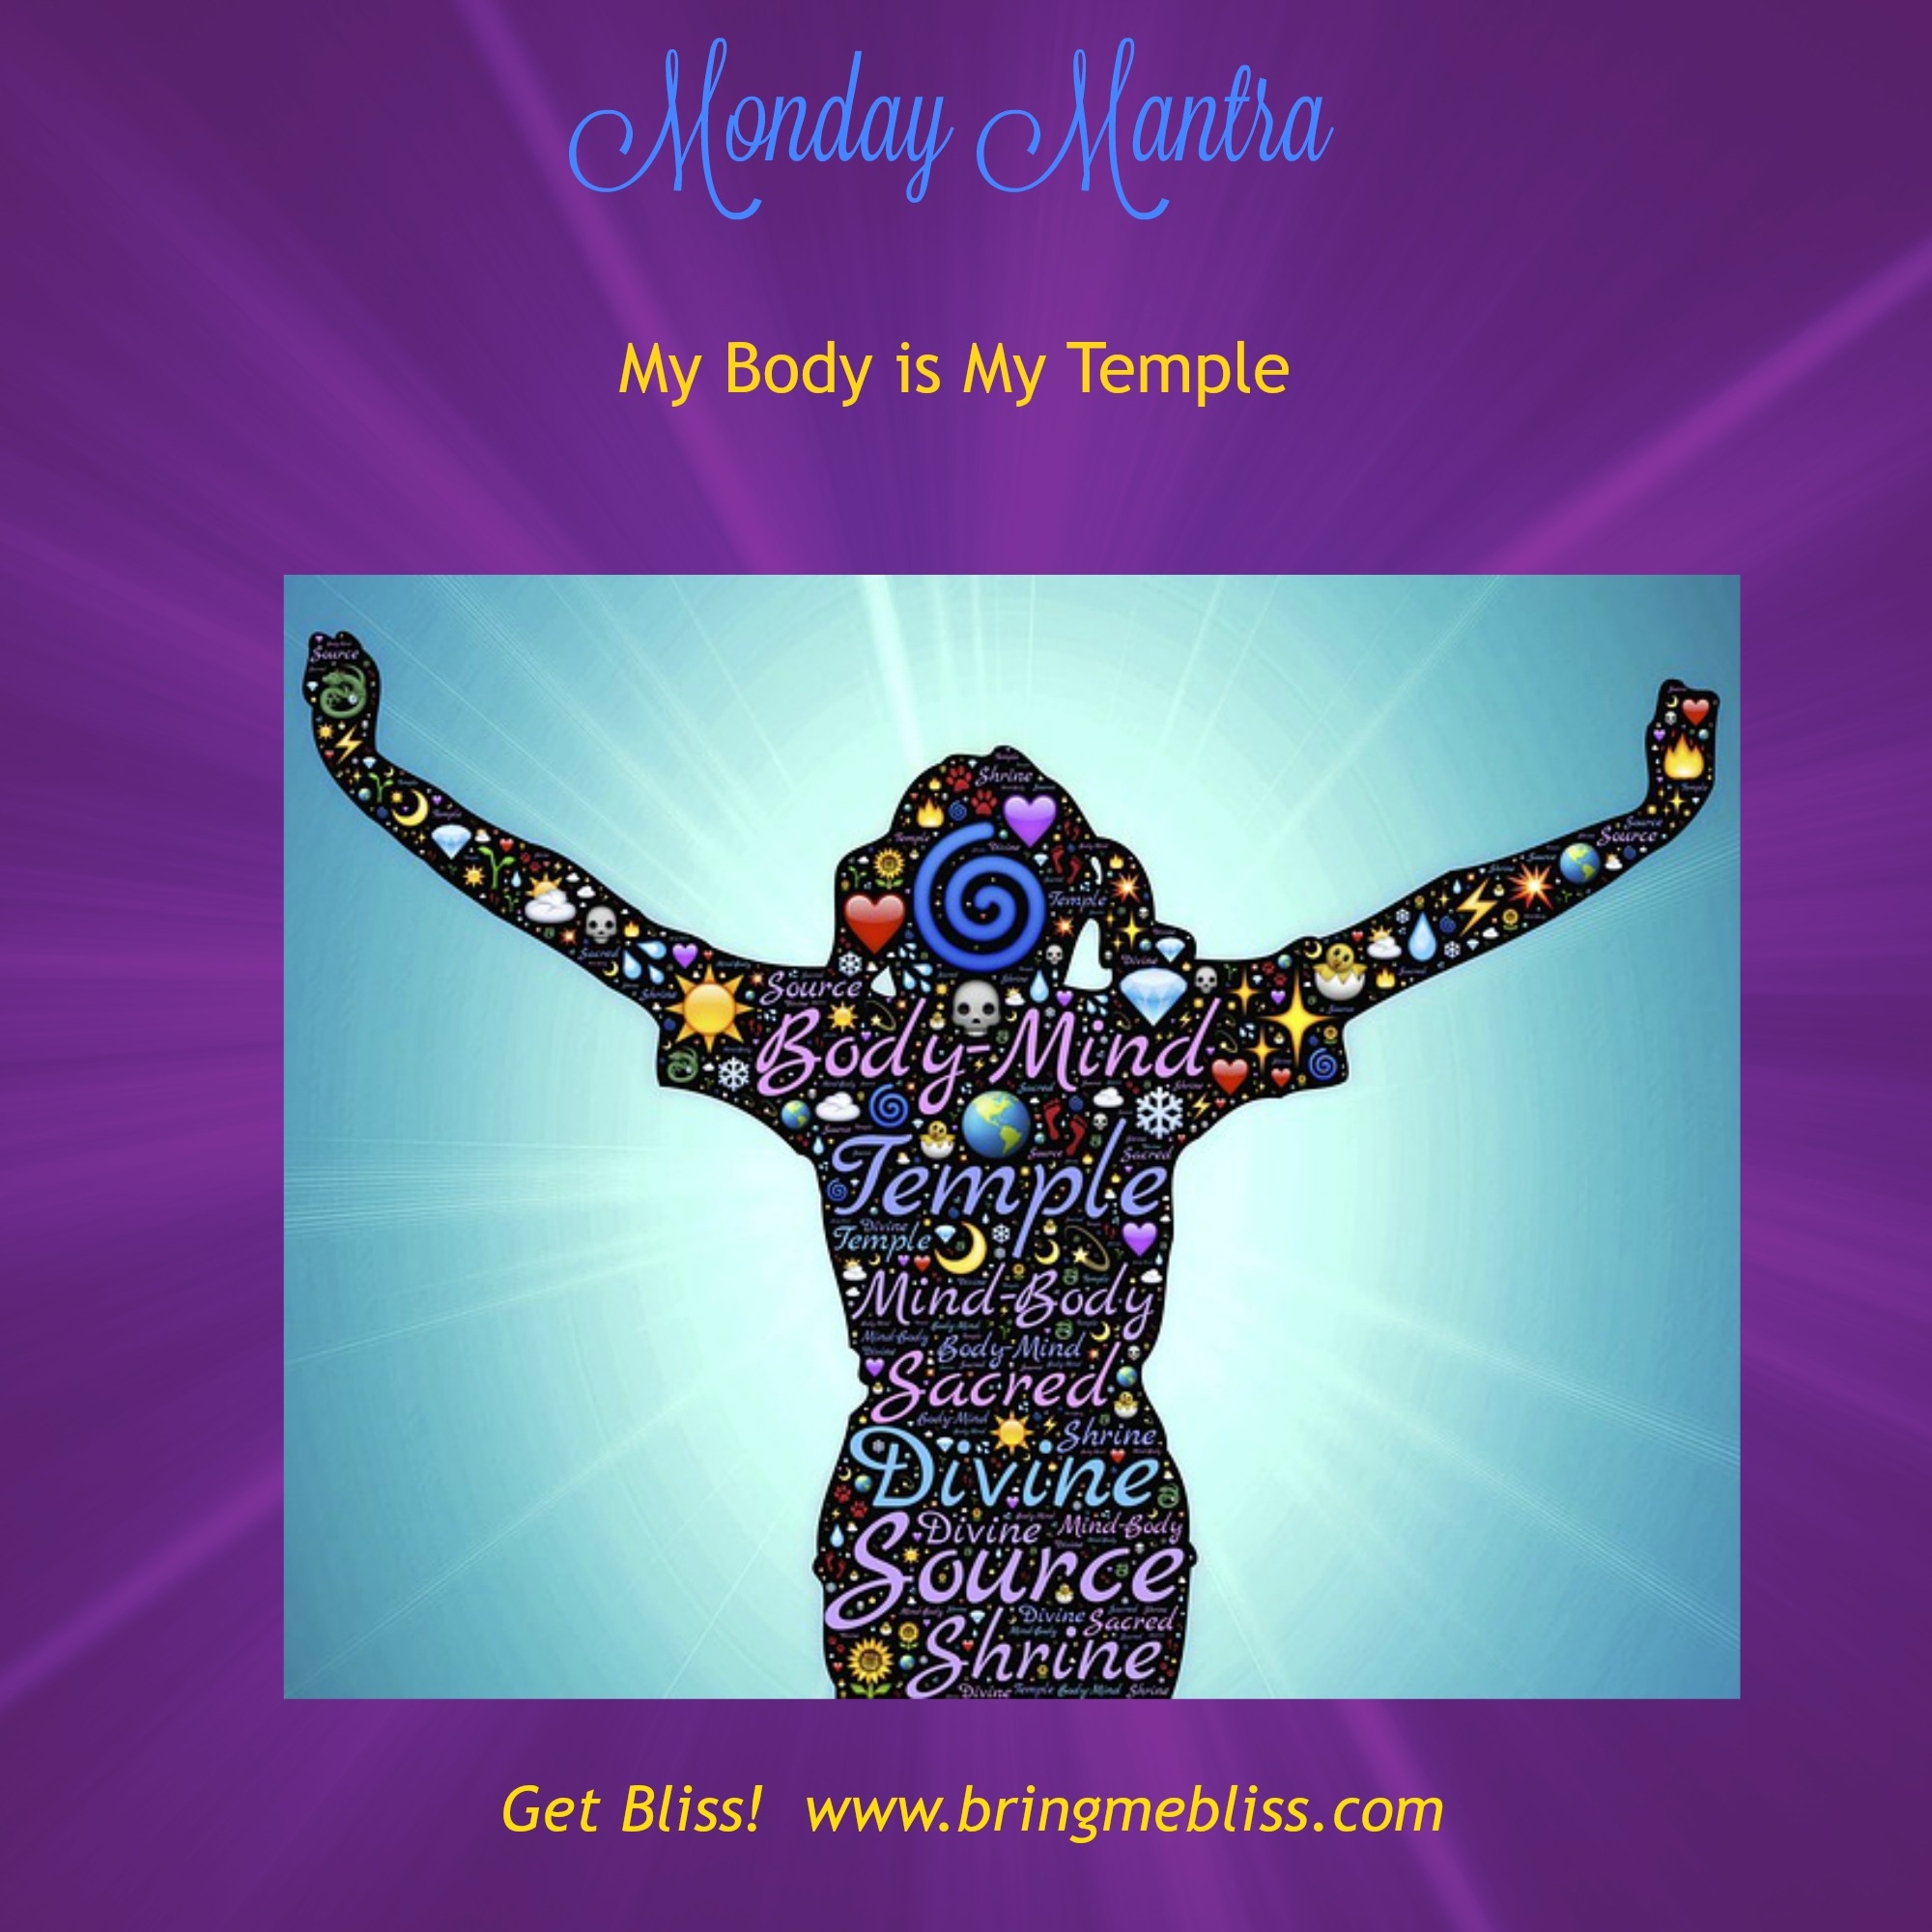 Monday Mantra – My Body is My Temple